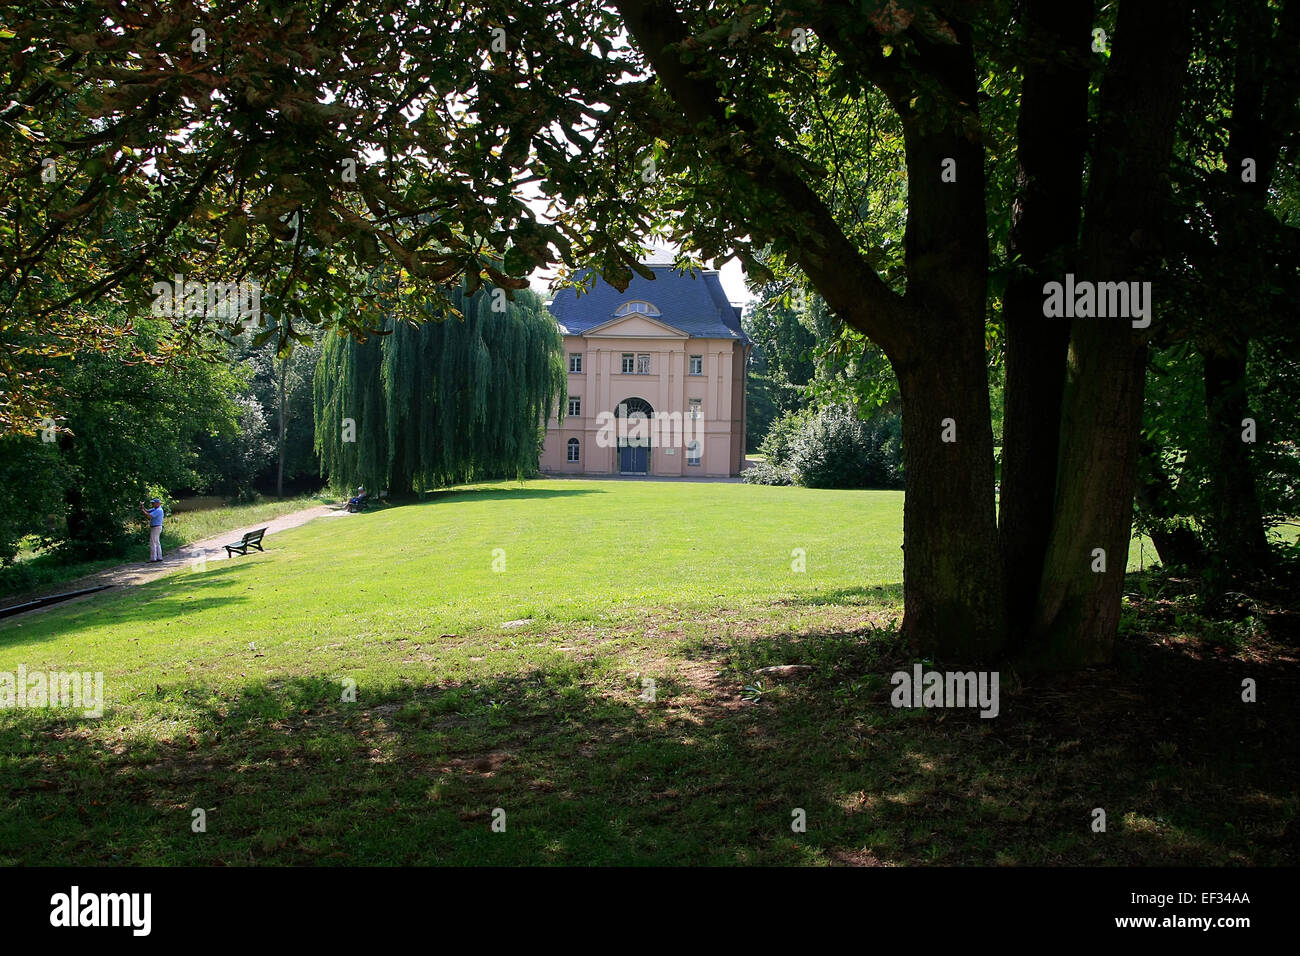 The Riding House in the Park an der Ilm. It was built in 1715-1718 in baroque style. Until 1848 it was a princely administration and thereafter in urban possession. Photo: Klaus Nowottnick Date: July 26, 2014 Stock Photo